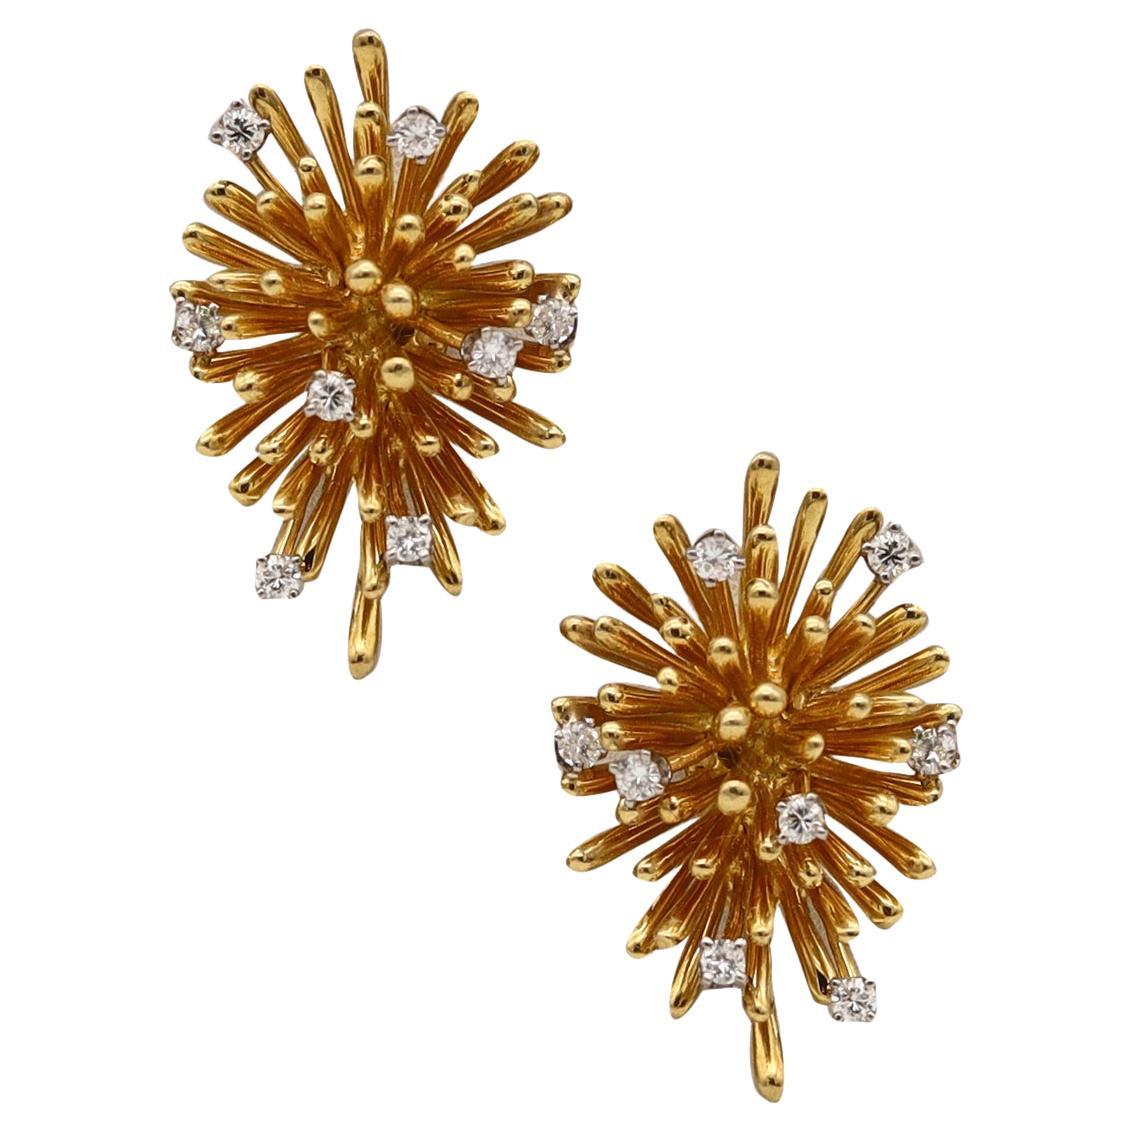 Tiffany & Co 1970 Clips on Spikes Earrings in 18Kt Gold with 1.02 Ctw Diamonds